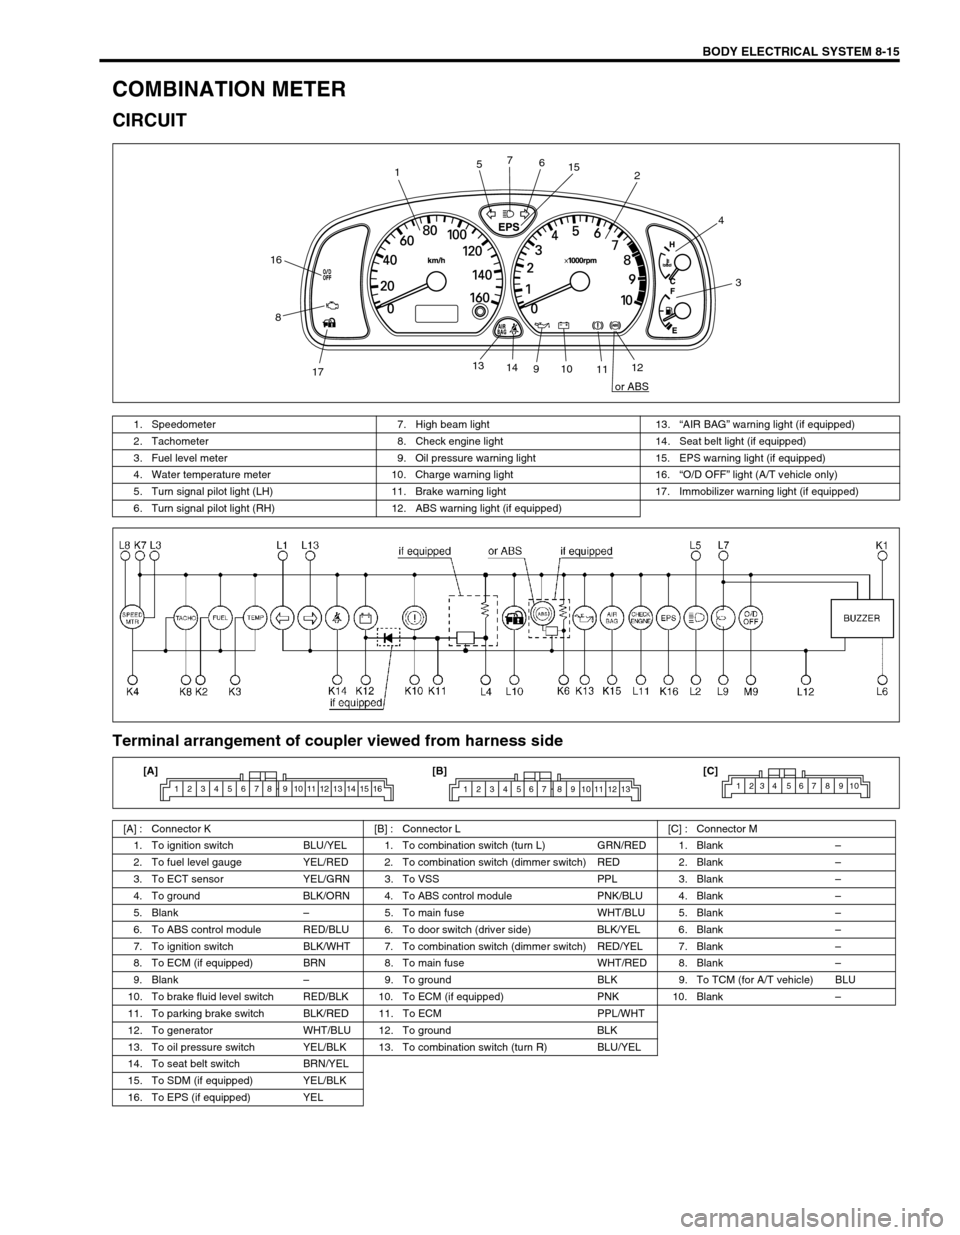 SUZUKI SWIFT 2000 1.G Transmission Service Service Manual BODY ELECTRICAL SYSTEM 8-15
COMBINATION METER
CIRCUIT
Terminal arrangement of coupler viewed from harness side
12
3 4
56 7
8
910
1112 13
14
1715
16
or ABS
1. Speedometer 7. High beam light 13.“AIR B